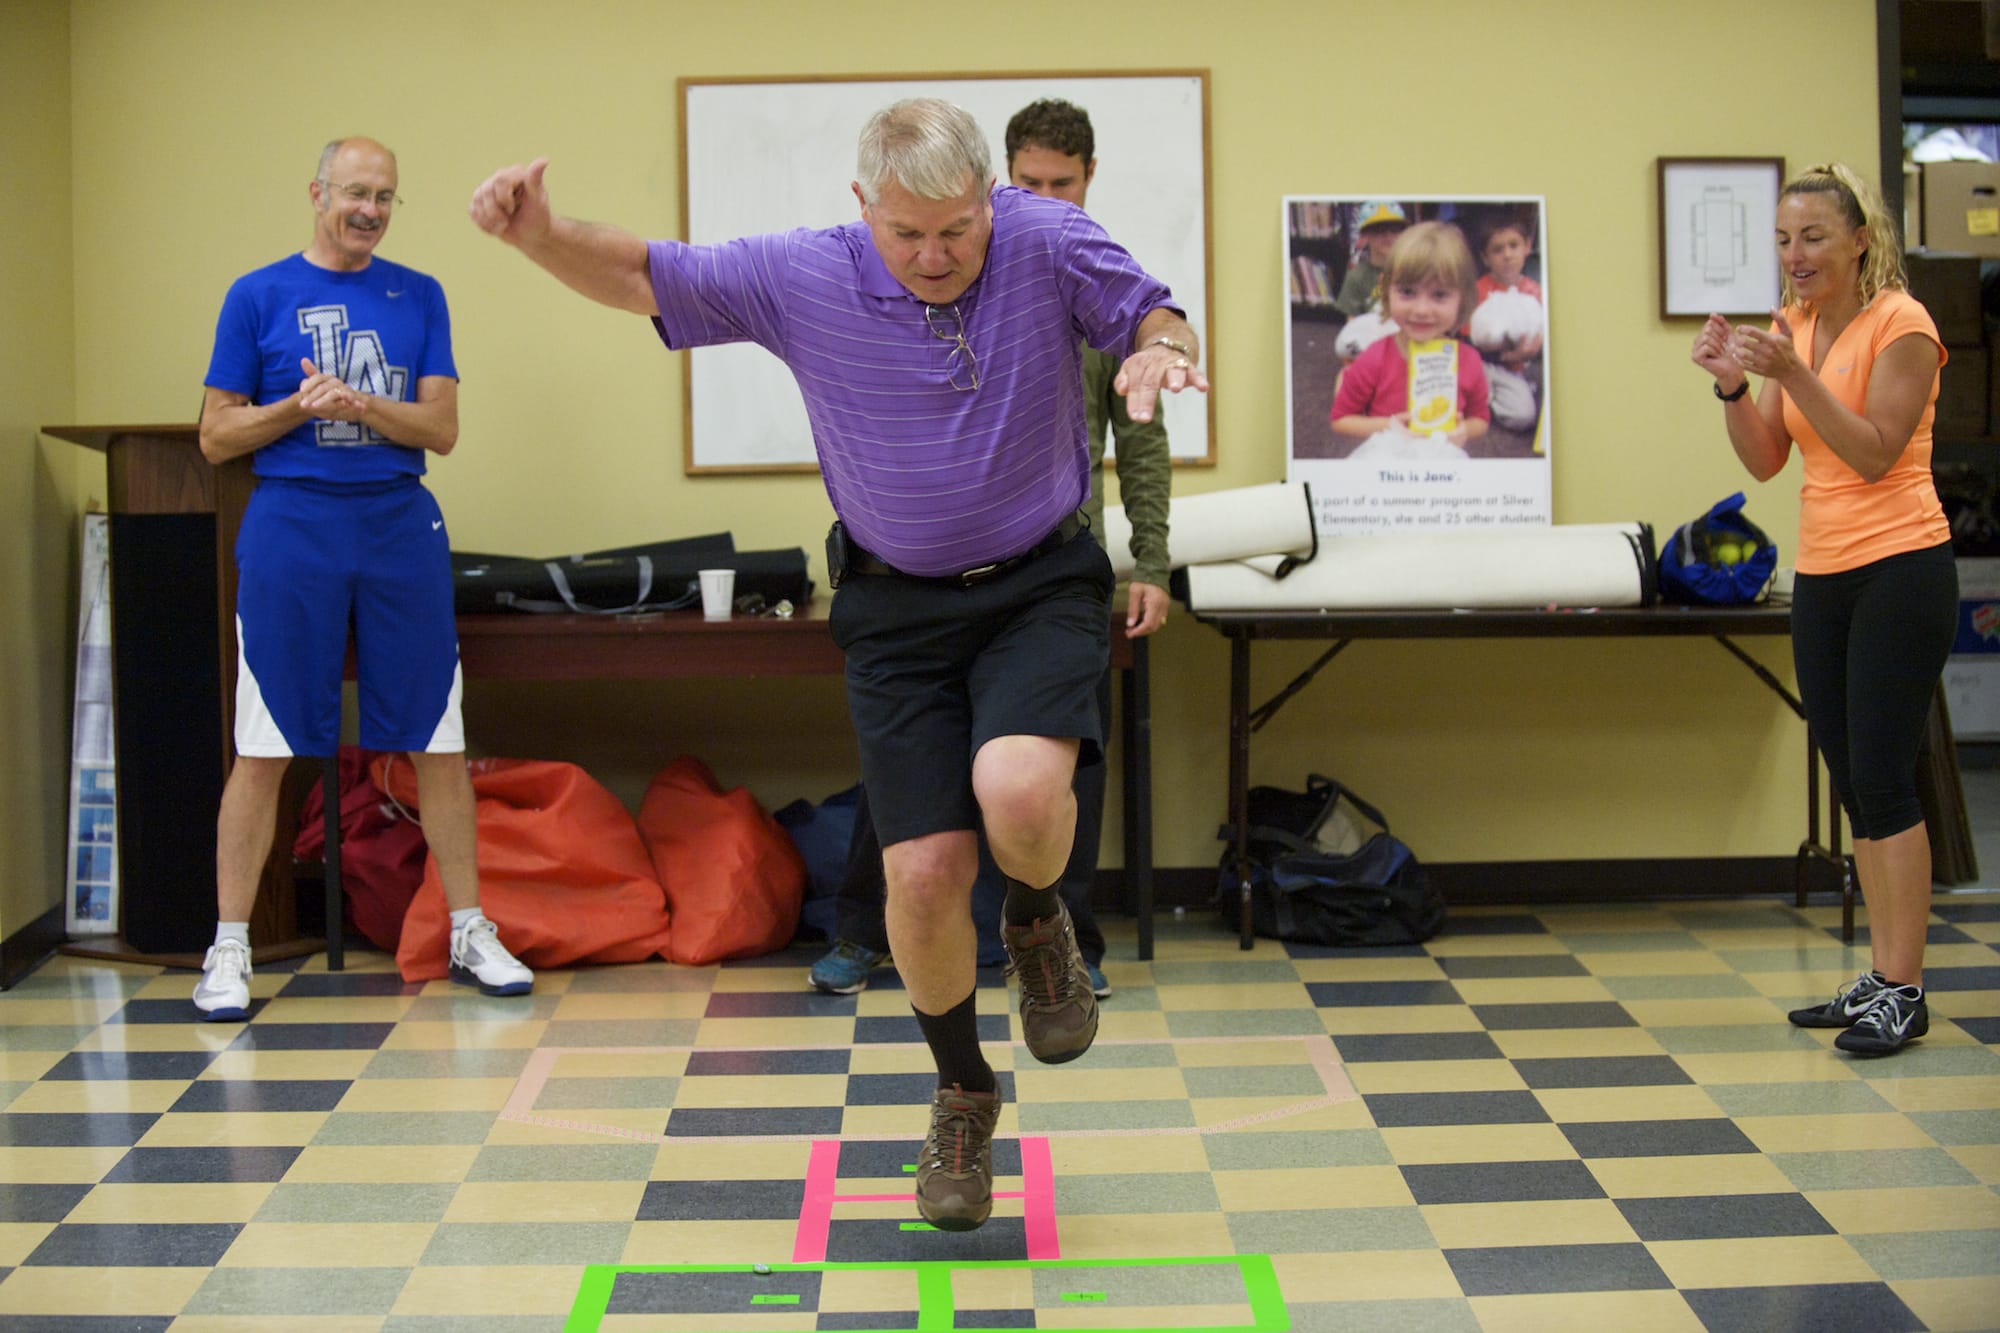 Vancouver City Councilmember Larry Smith competes in a game of Celebrity Hopscotch at the Share Fromhold Service Center as part of the Give More 24 charity event, Thursday, September 18, 2014.